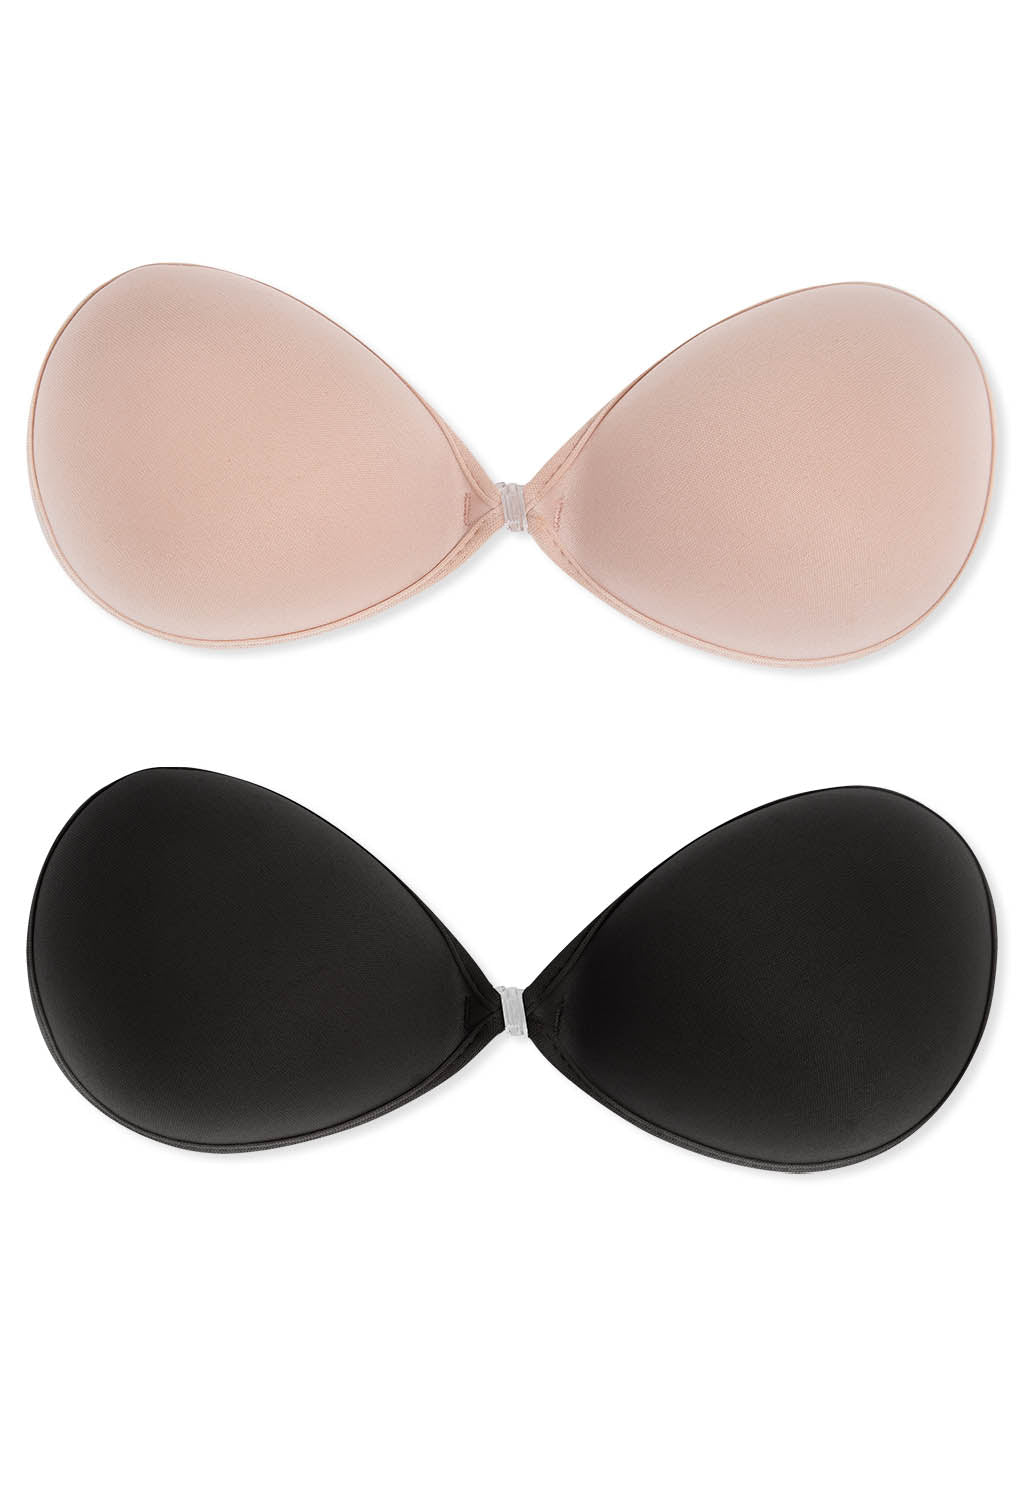 Wholesale backless bras large breasts For Supportive Underwear